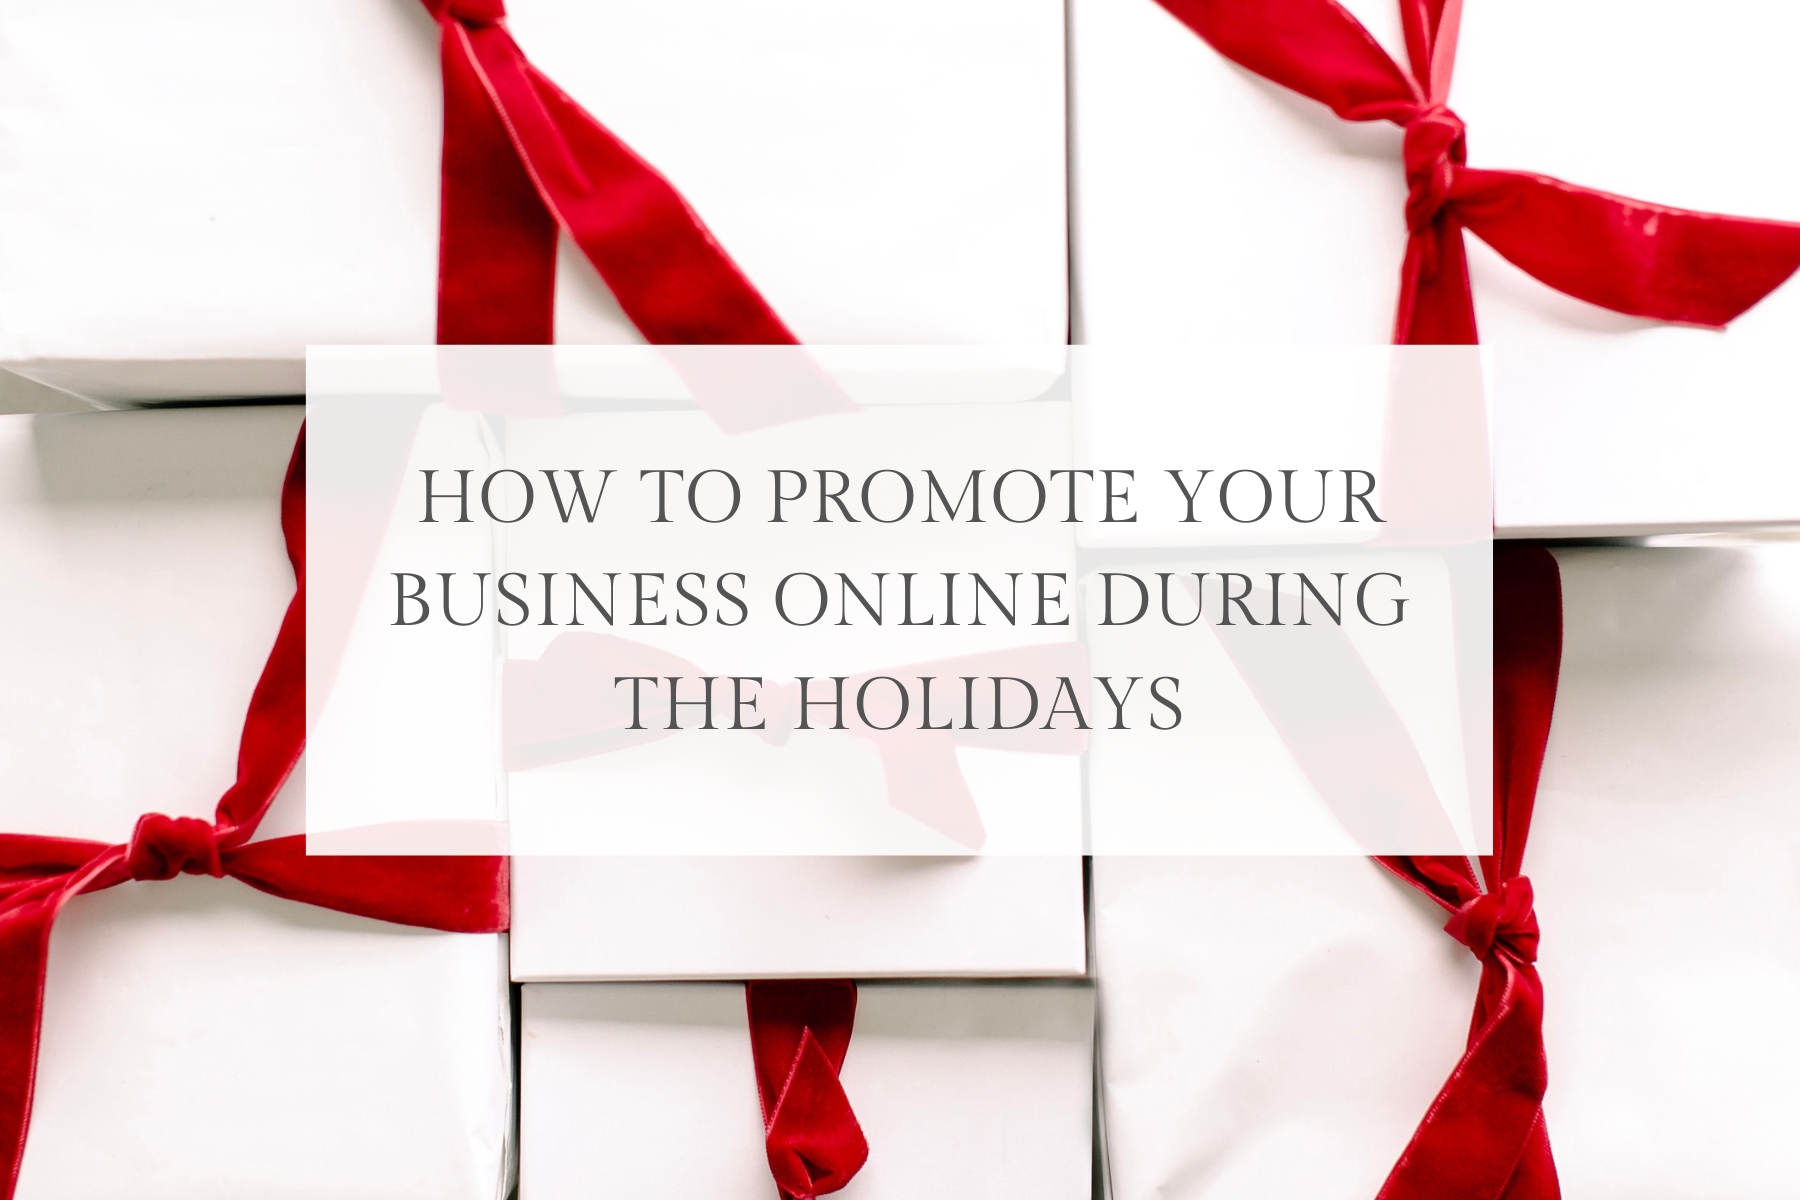 how to promote your business online during the holidays as a photographer